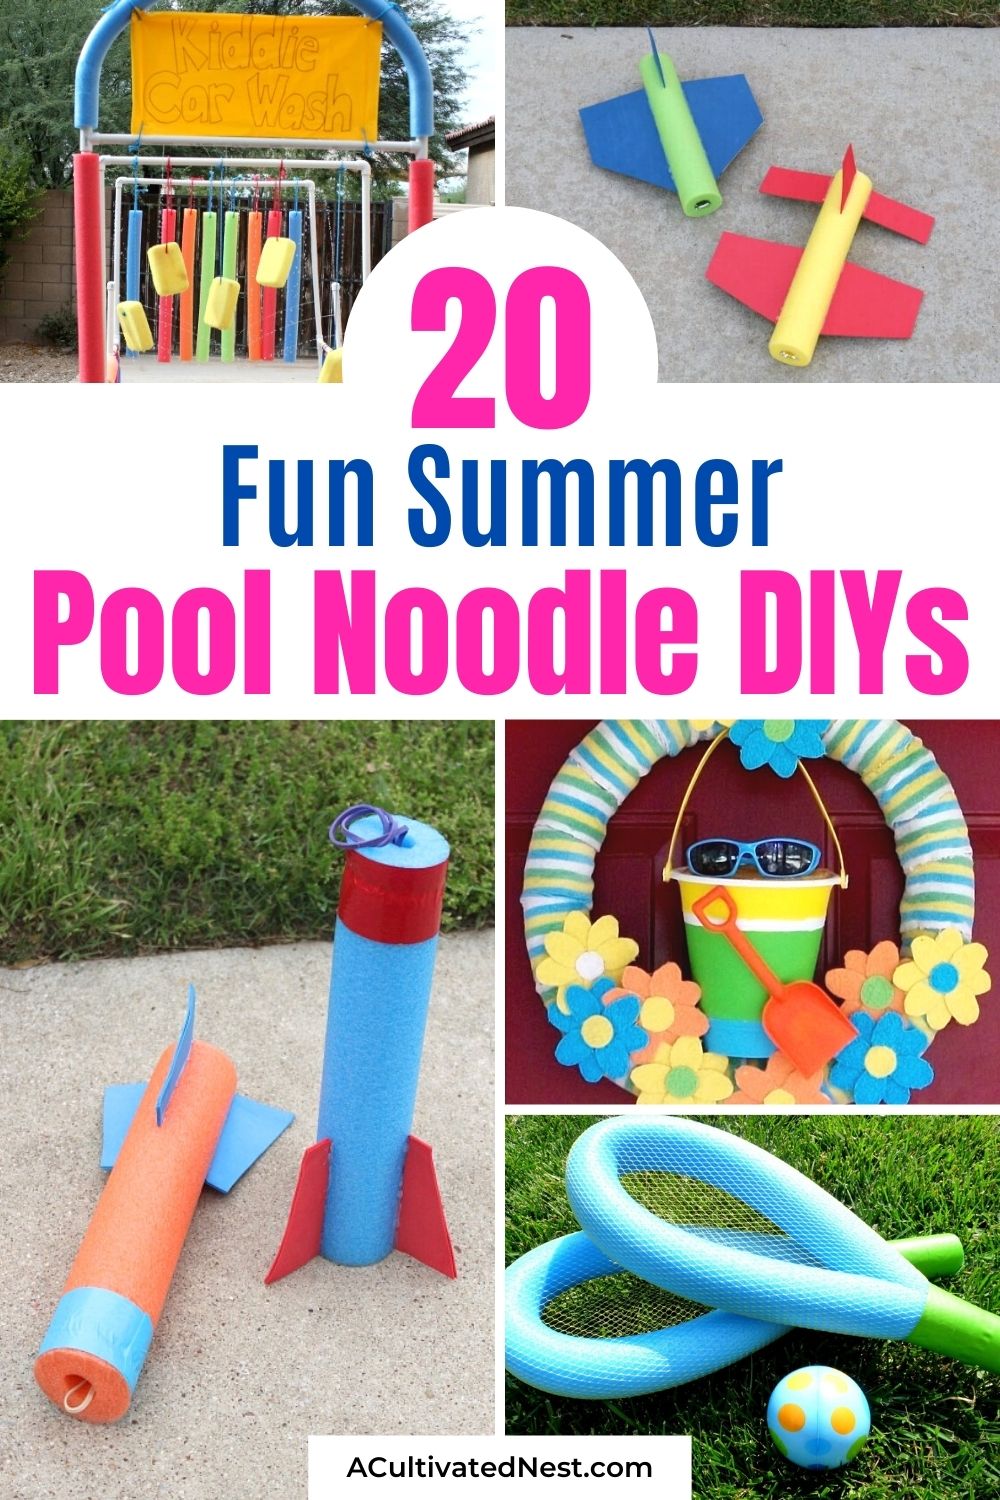 20 Fun Summer Pool Noodle DIY Ideas- For a fun, frugal summer kid's craft, you should make some summer pool noodle DIYs! They're a lot of fun to make, and are sure to make you and your kids smile! | repurpose pool noodles, pool noodle crafts, #summerCrafts #kidsCrafts #summerDIY #poolNoodles #ACultivatedNest